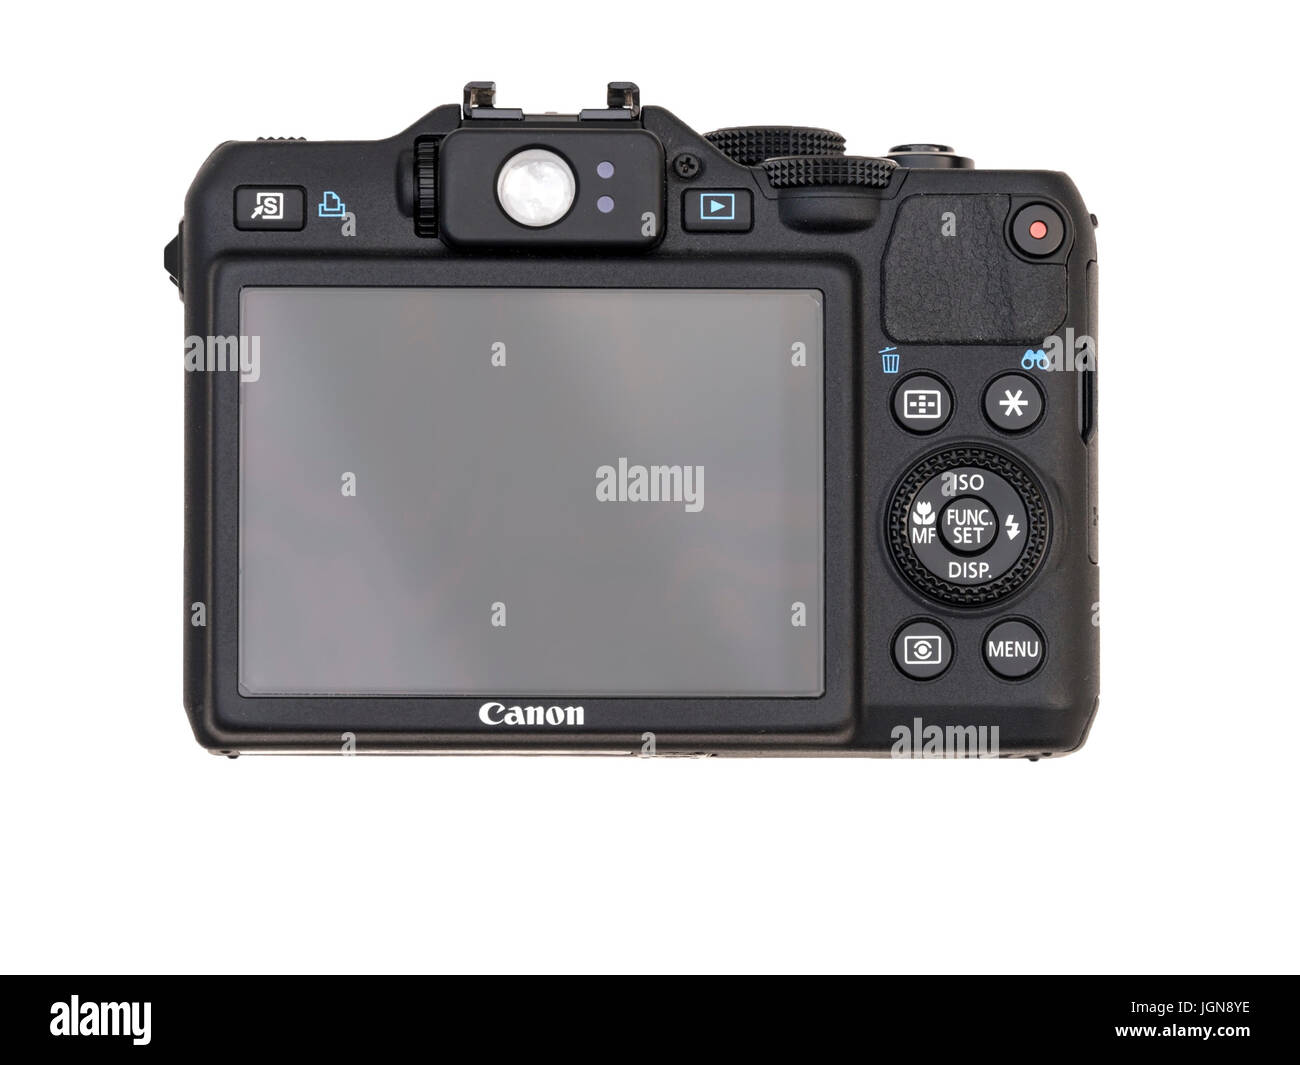 G15 hi-res photography and Alamy